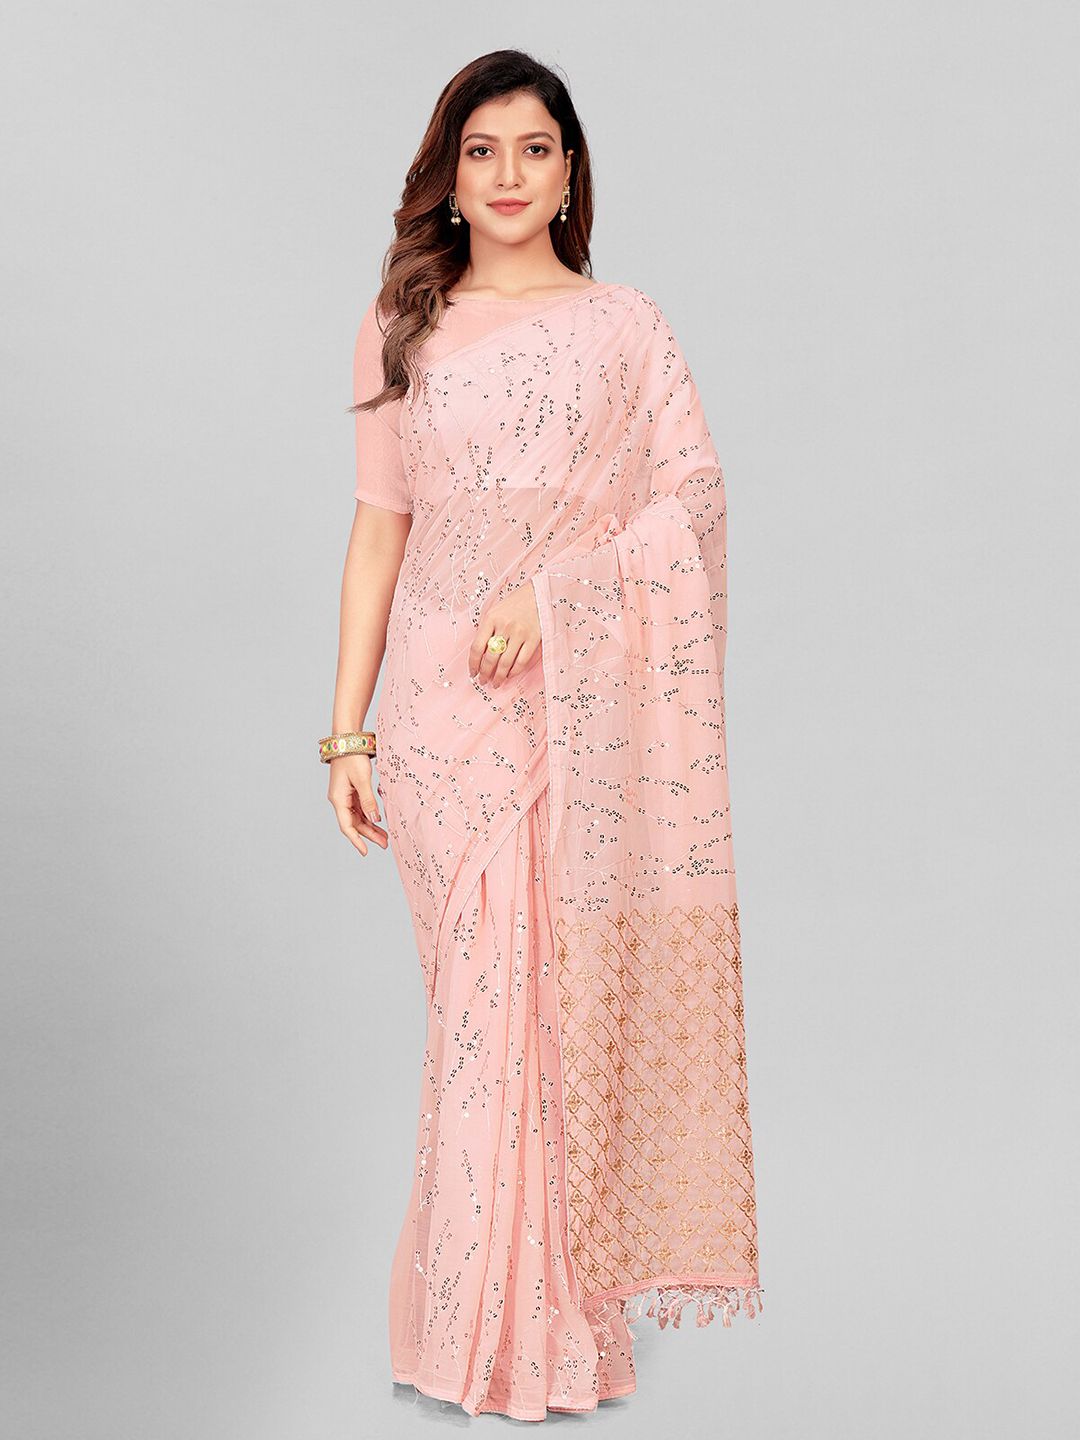 Granthva Fab Rose & Silver-Toned Embellished Sequinned Pure Georgette Saree Price in India